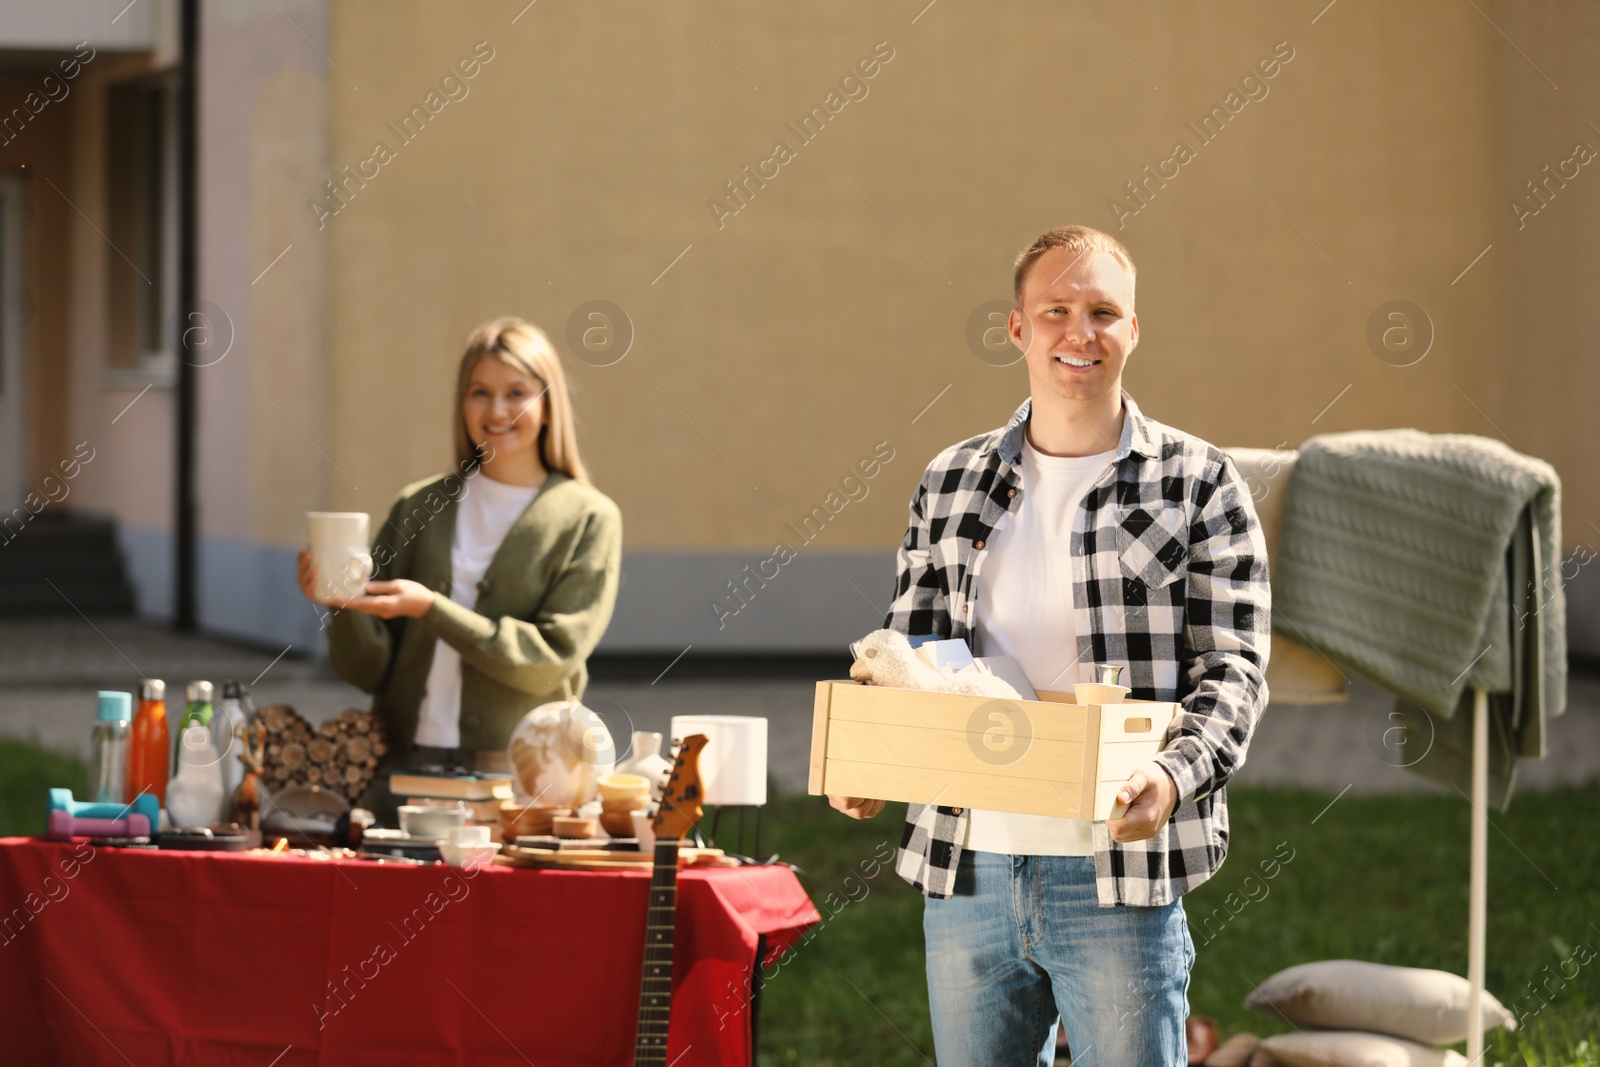 Photo of Man with wooden crate and woman near table of different items in yard